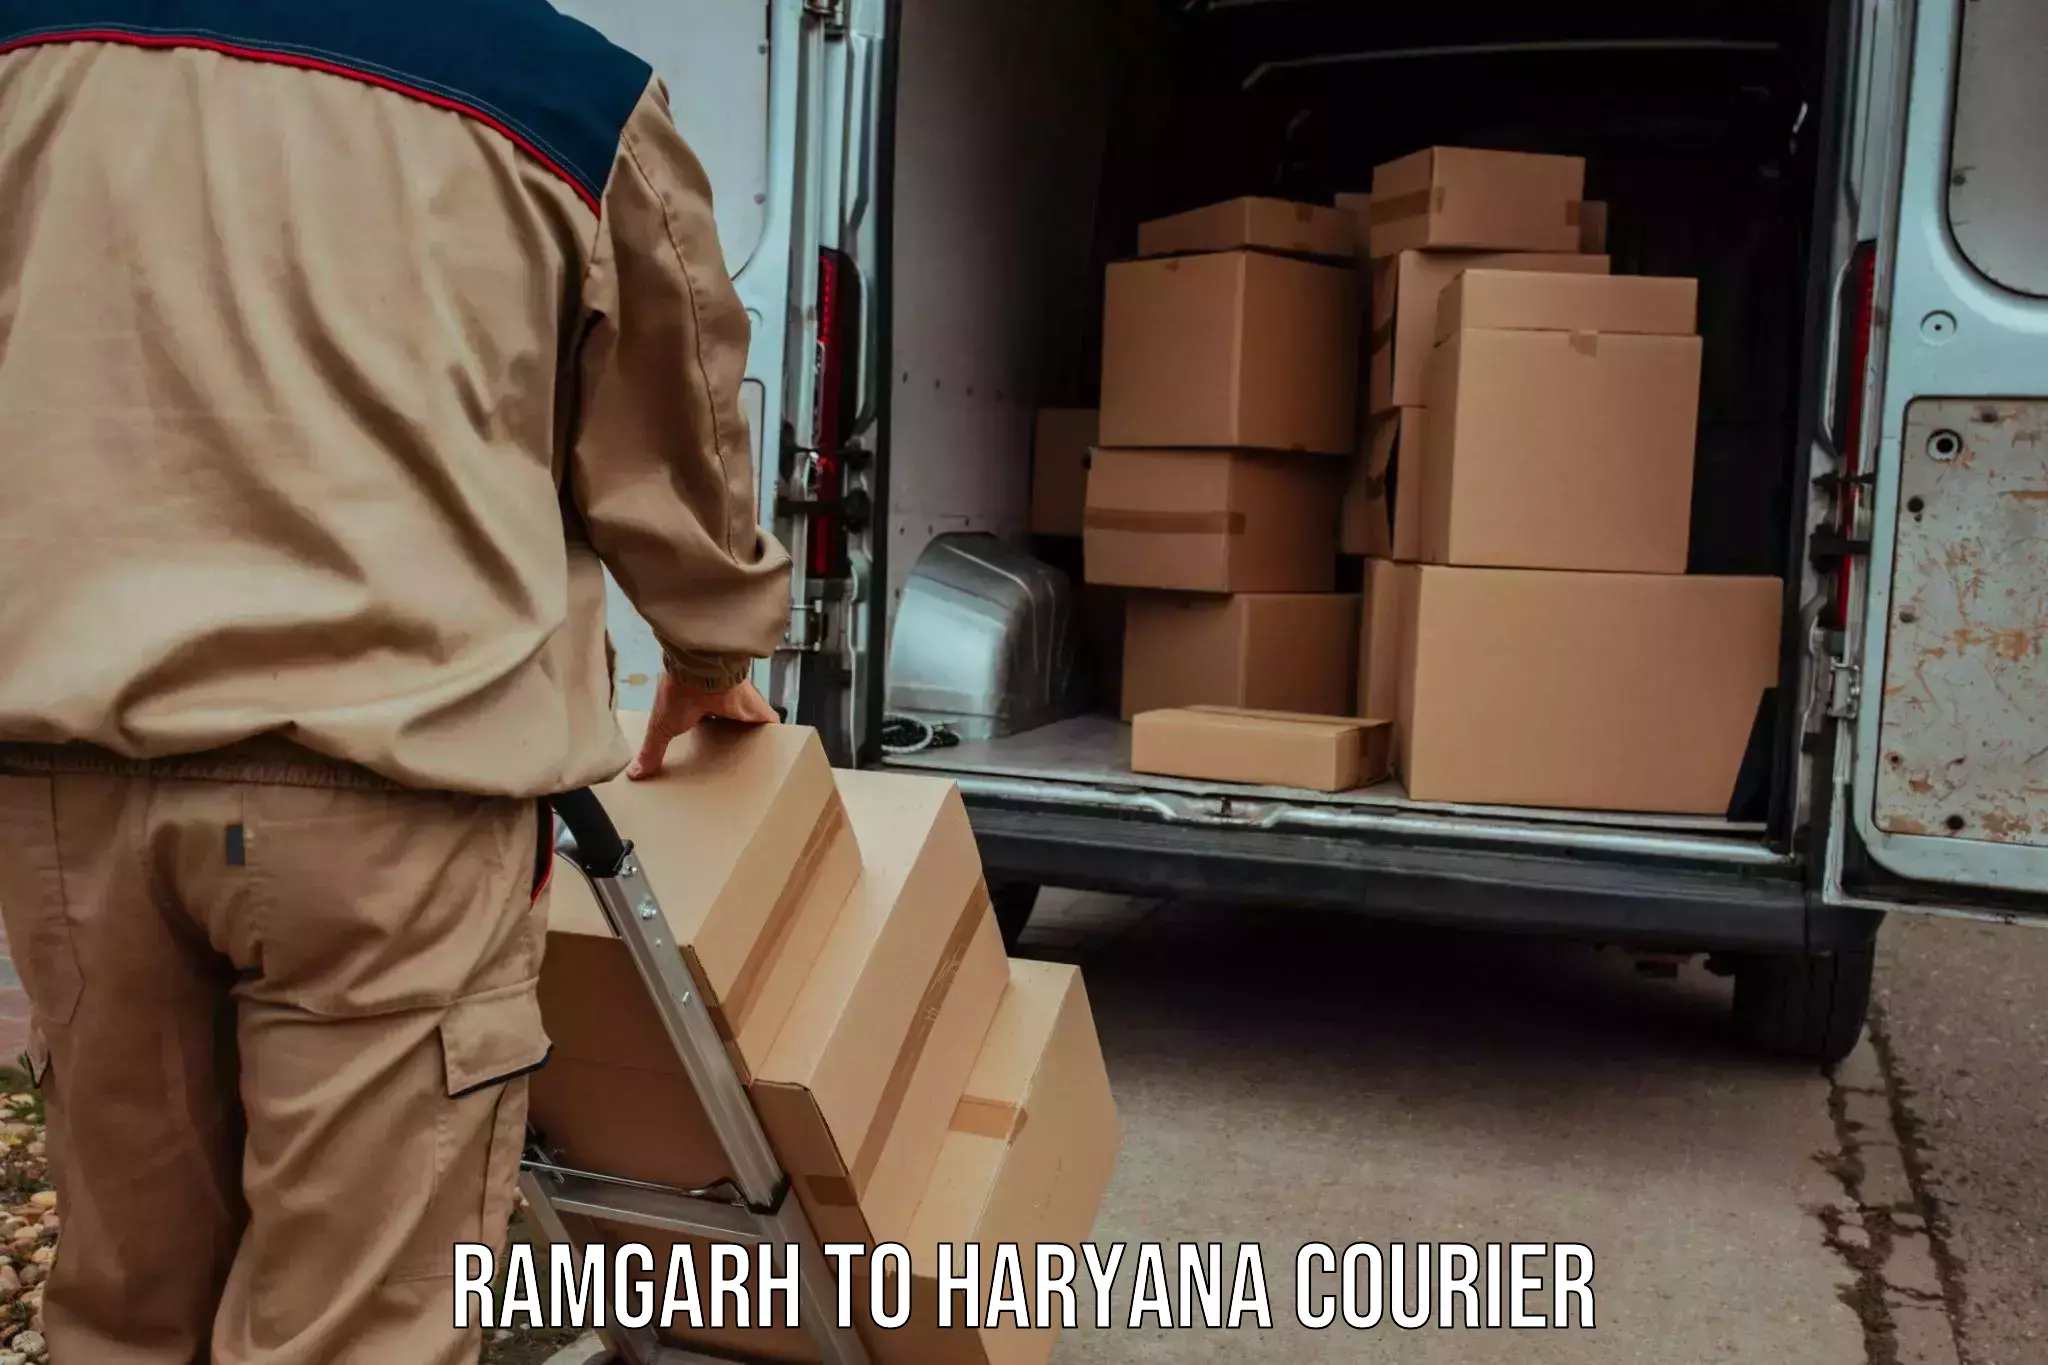 Next day courier Ramgarh to Panipat